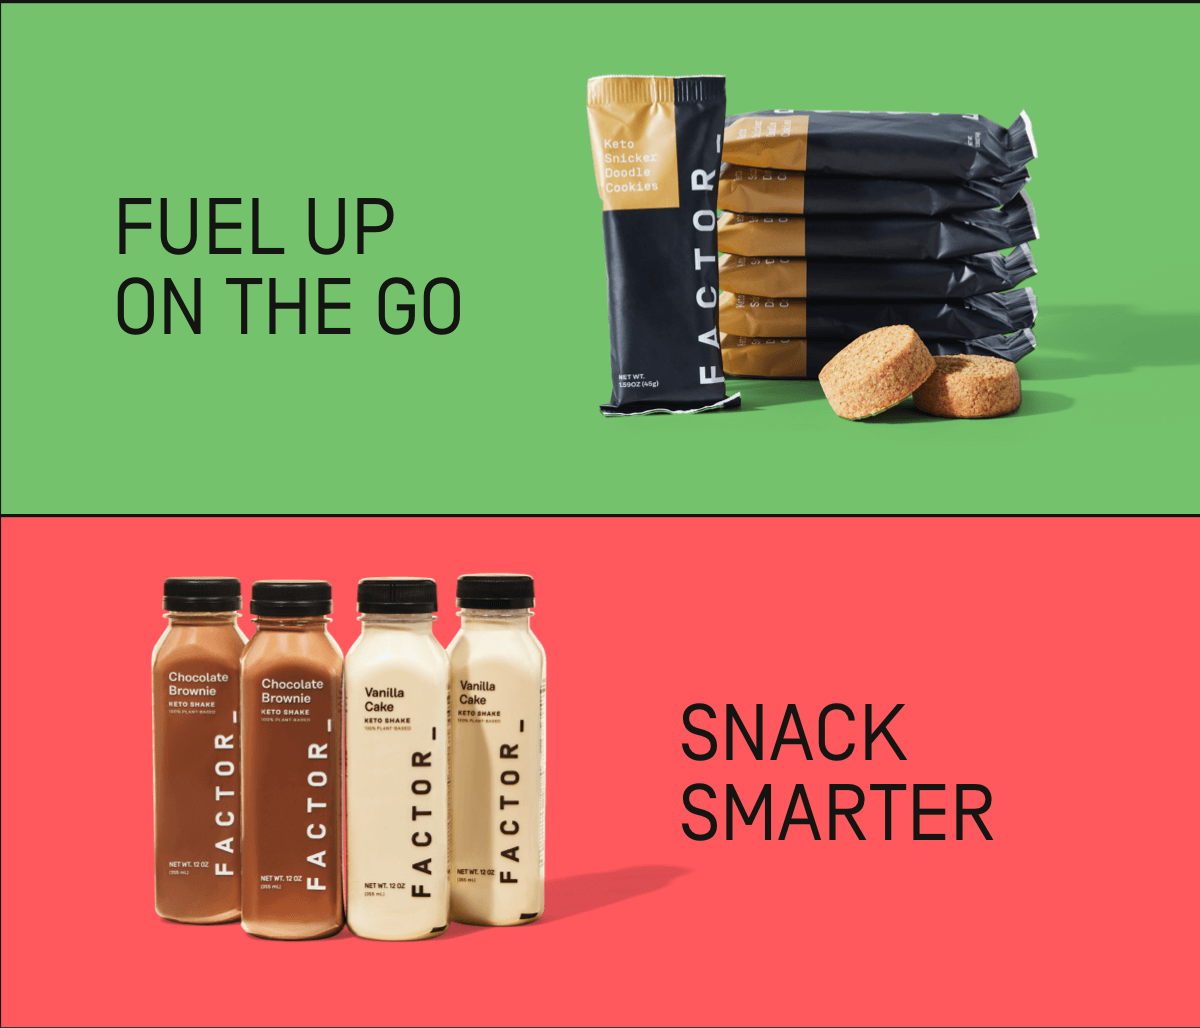 Fuel up on the go, snack smarter